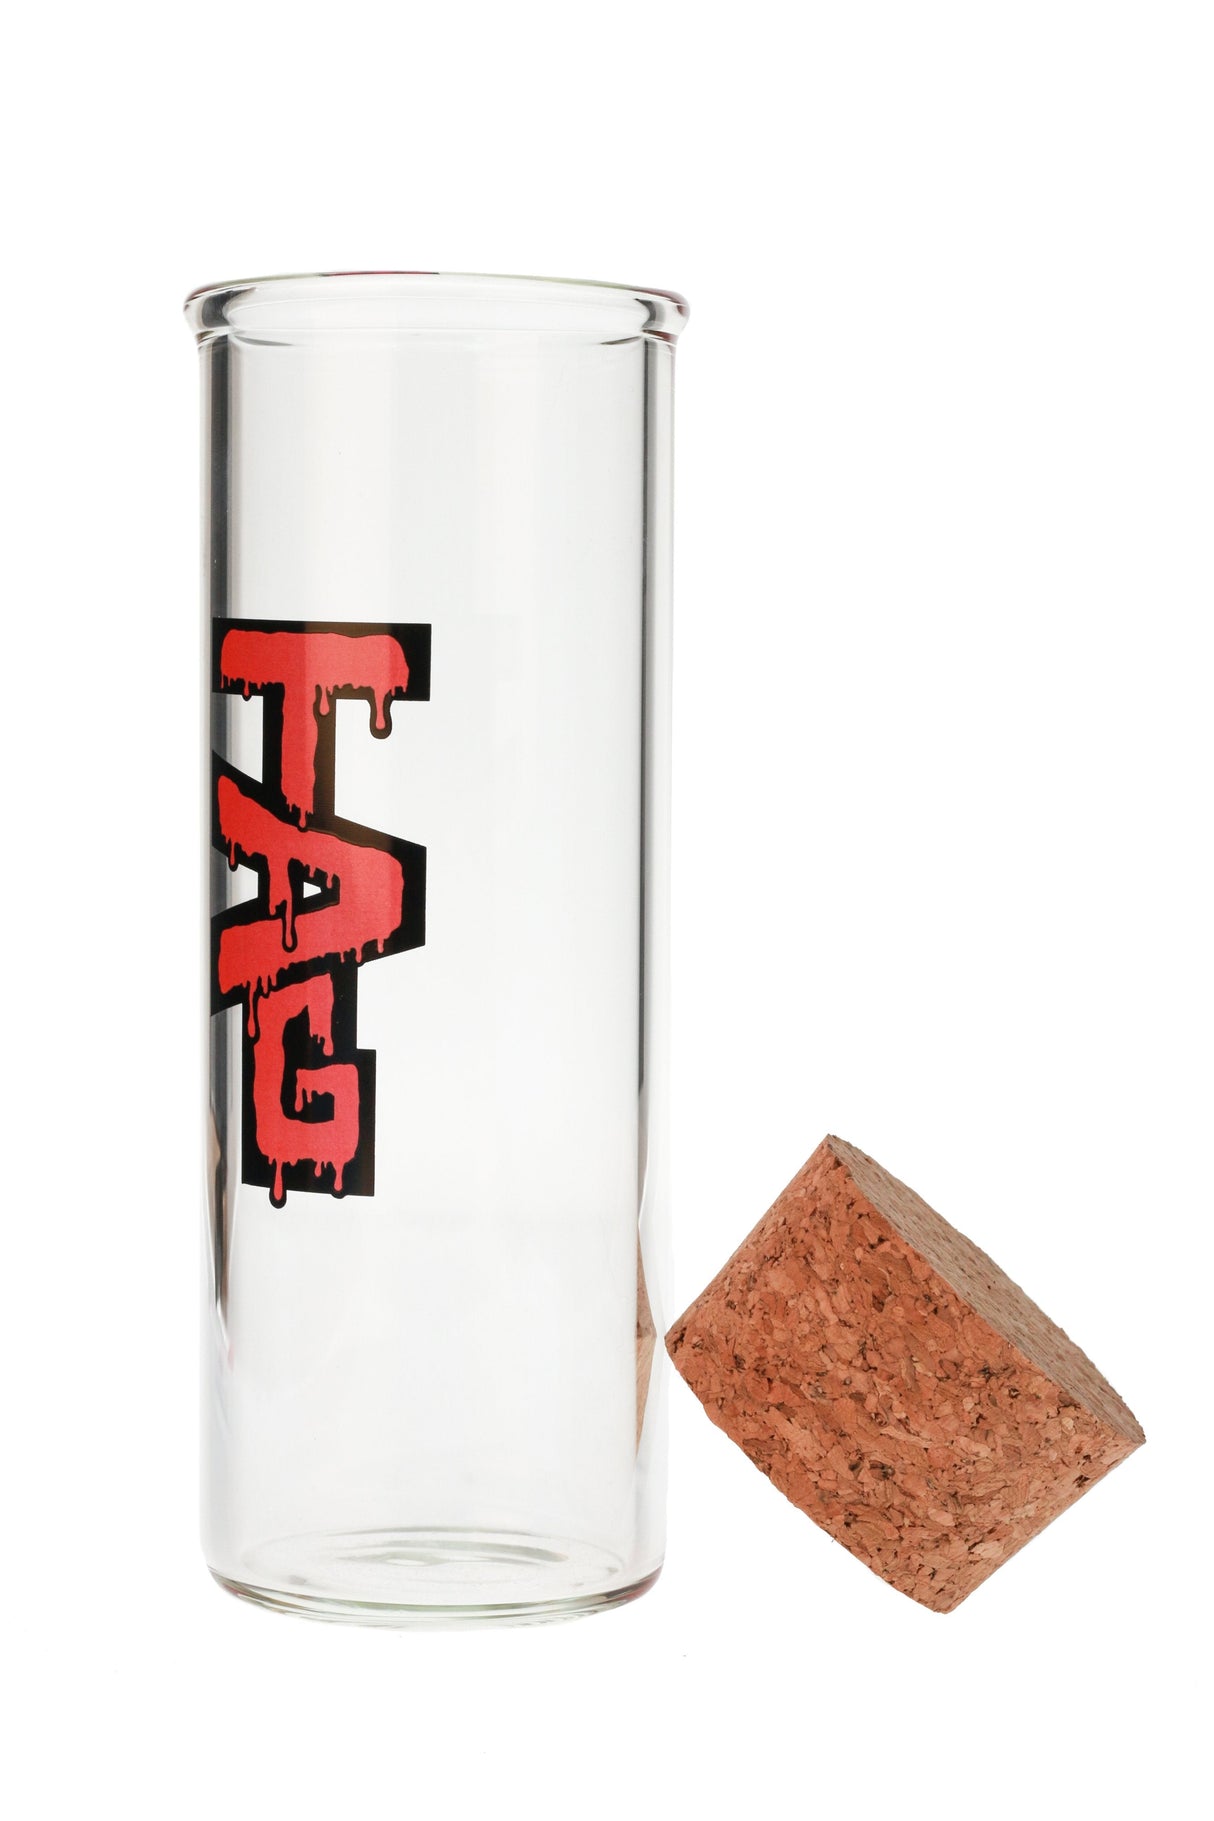 TAG - 8" Clear Glass Jar with Cork Top, 75x5MM, Front View with TAG Logo